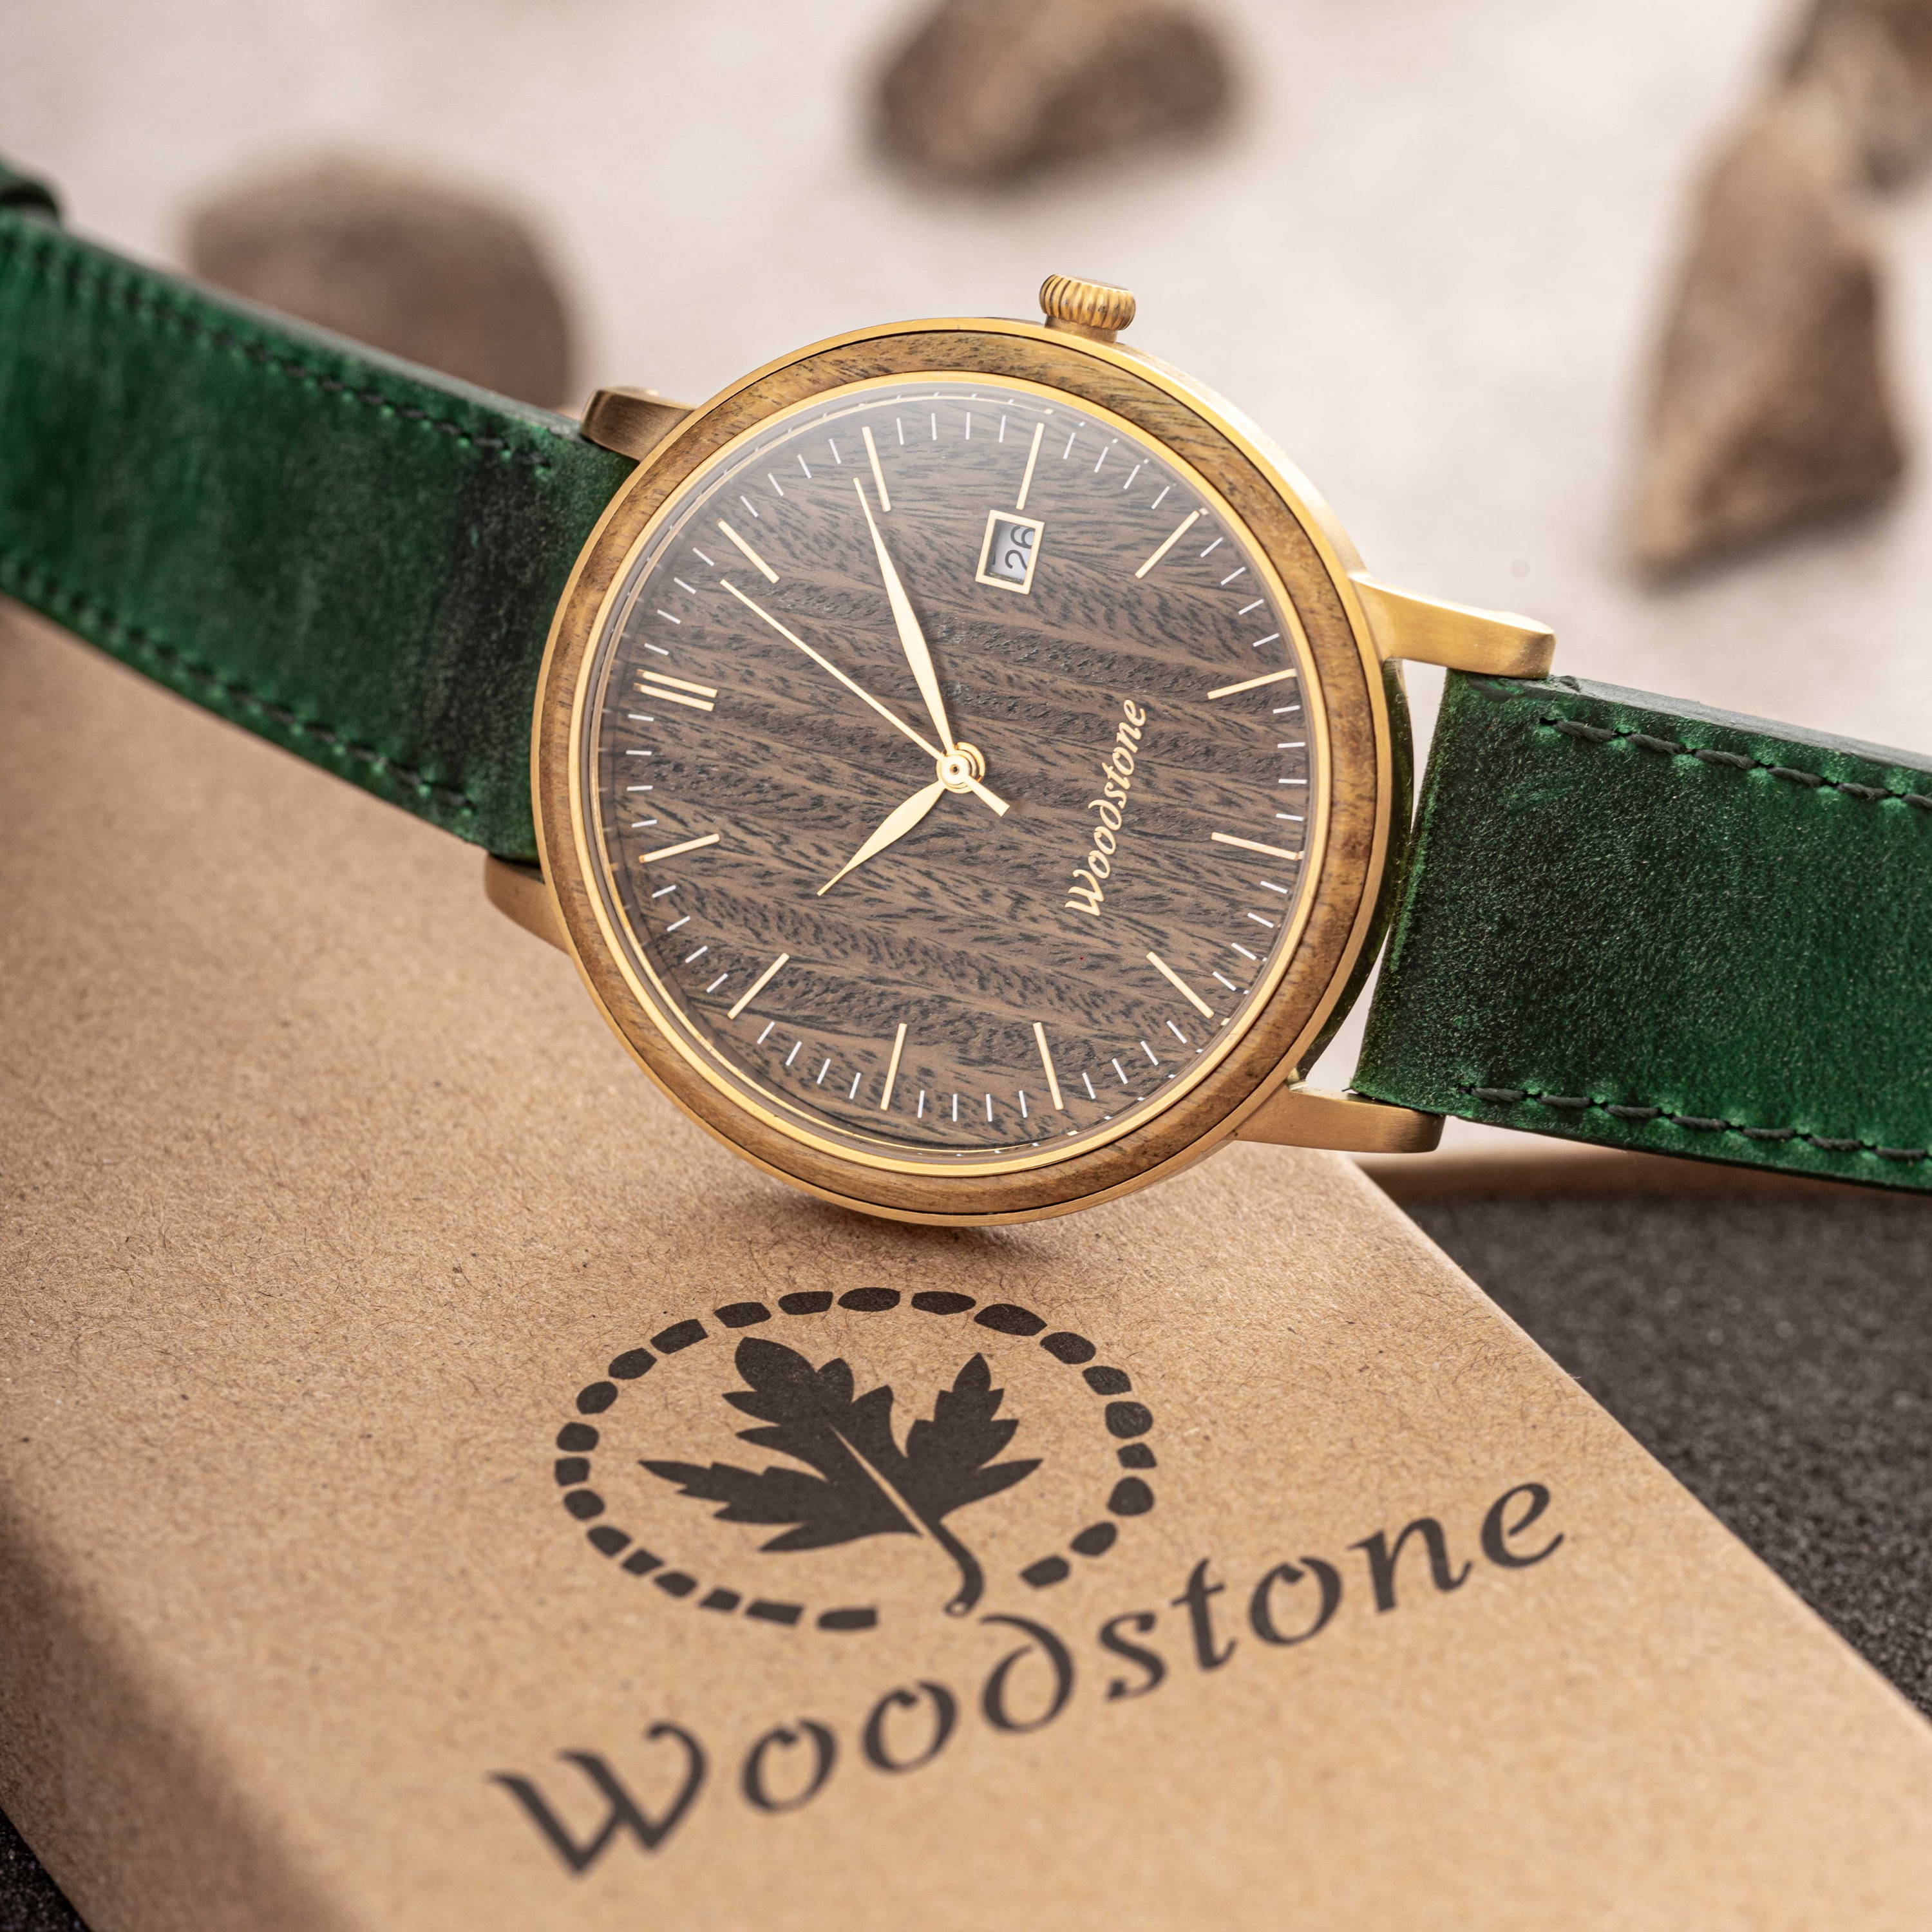 Woodstone wooden watches perfect anniversary gifts for man green sandalwood